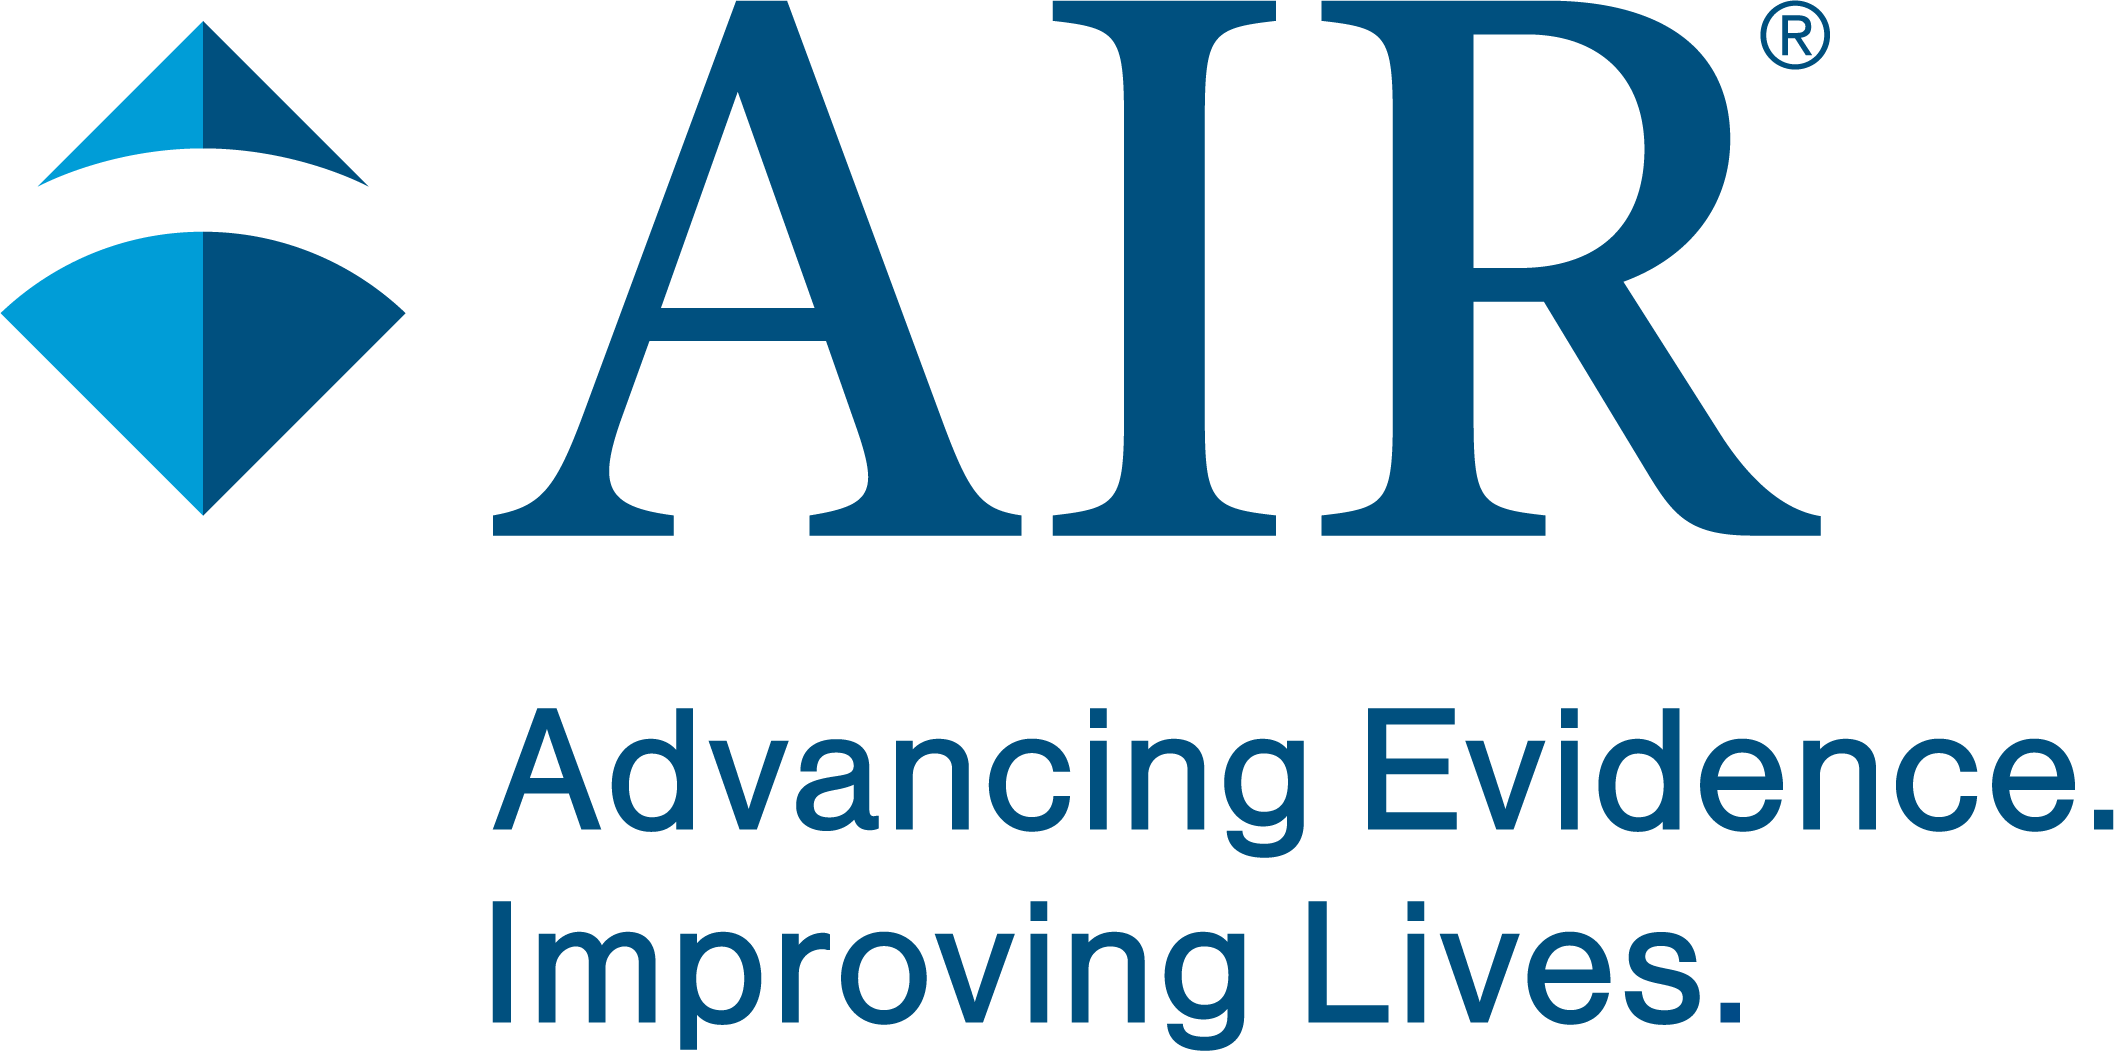 AIR - Advancing Evidence. Improving Lives.